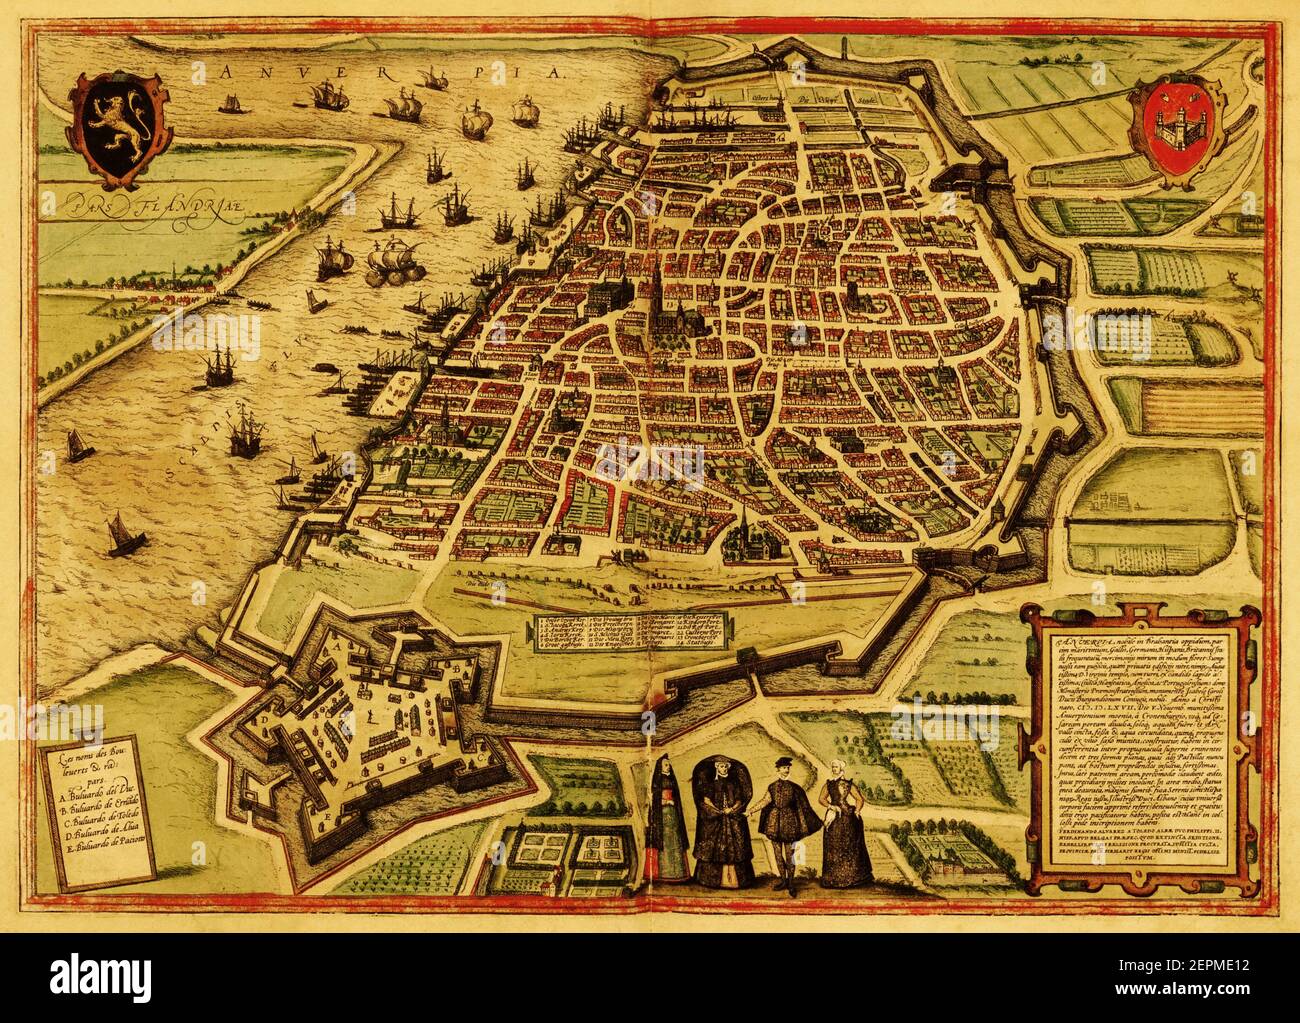 Historic map of the town of Antwerpen, Belgium. Published in the first Latin edition of Braun and Hogenberg's Civitates Orbis Terrarum in 1572. Stock Photo